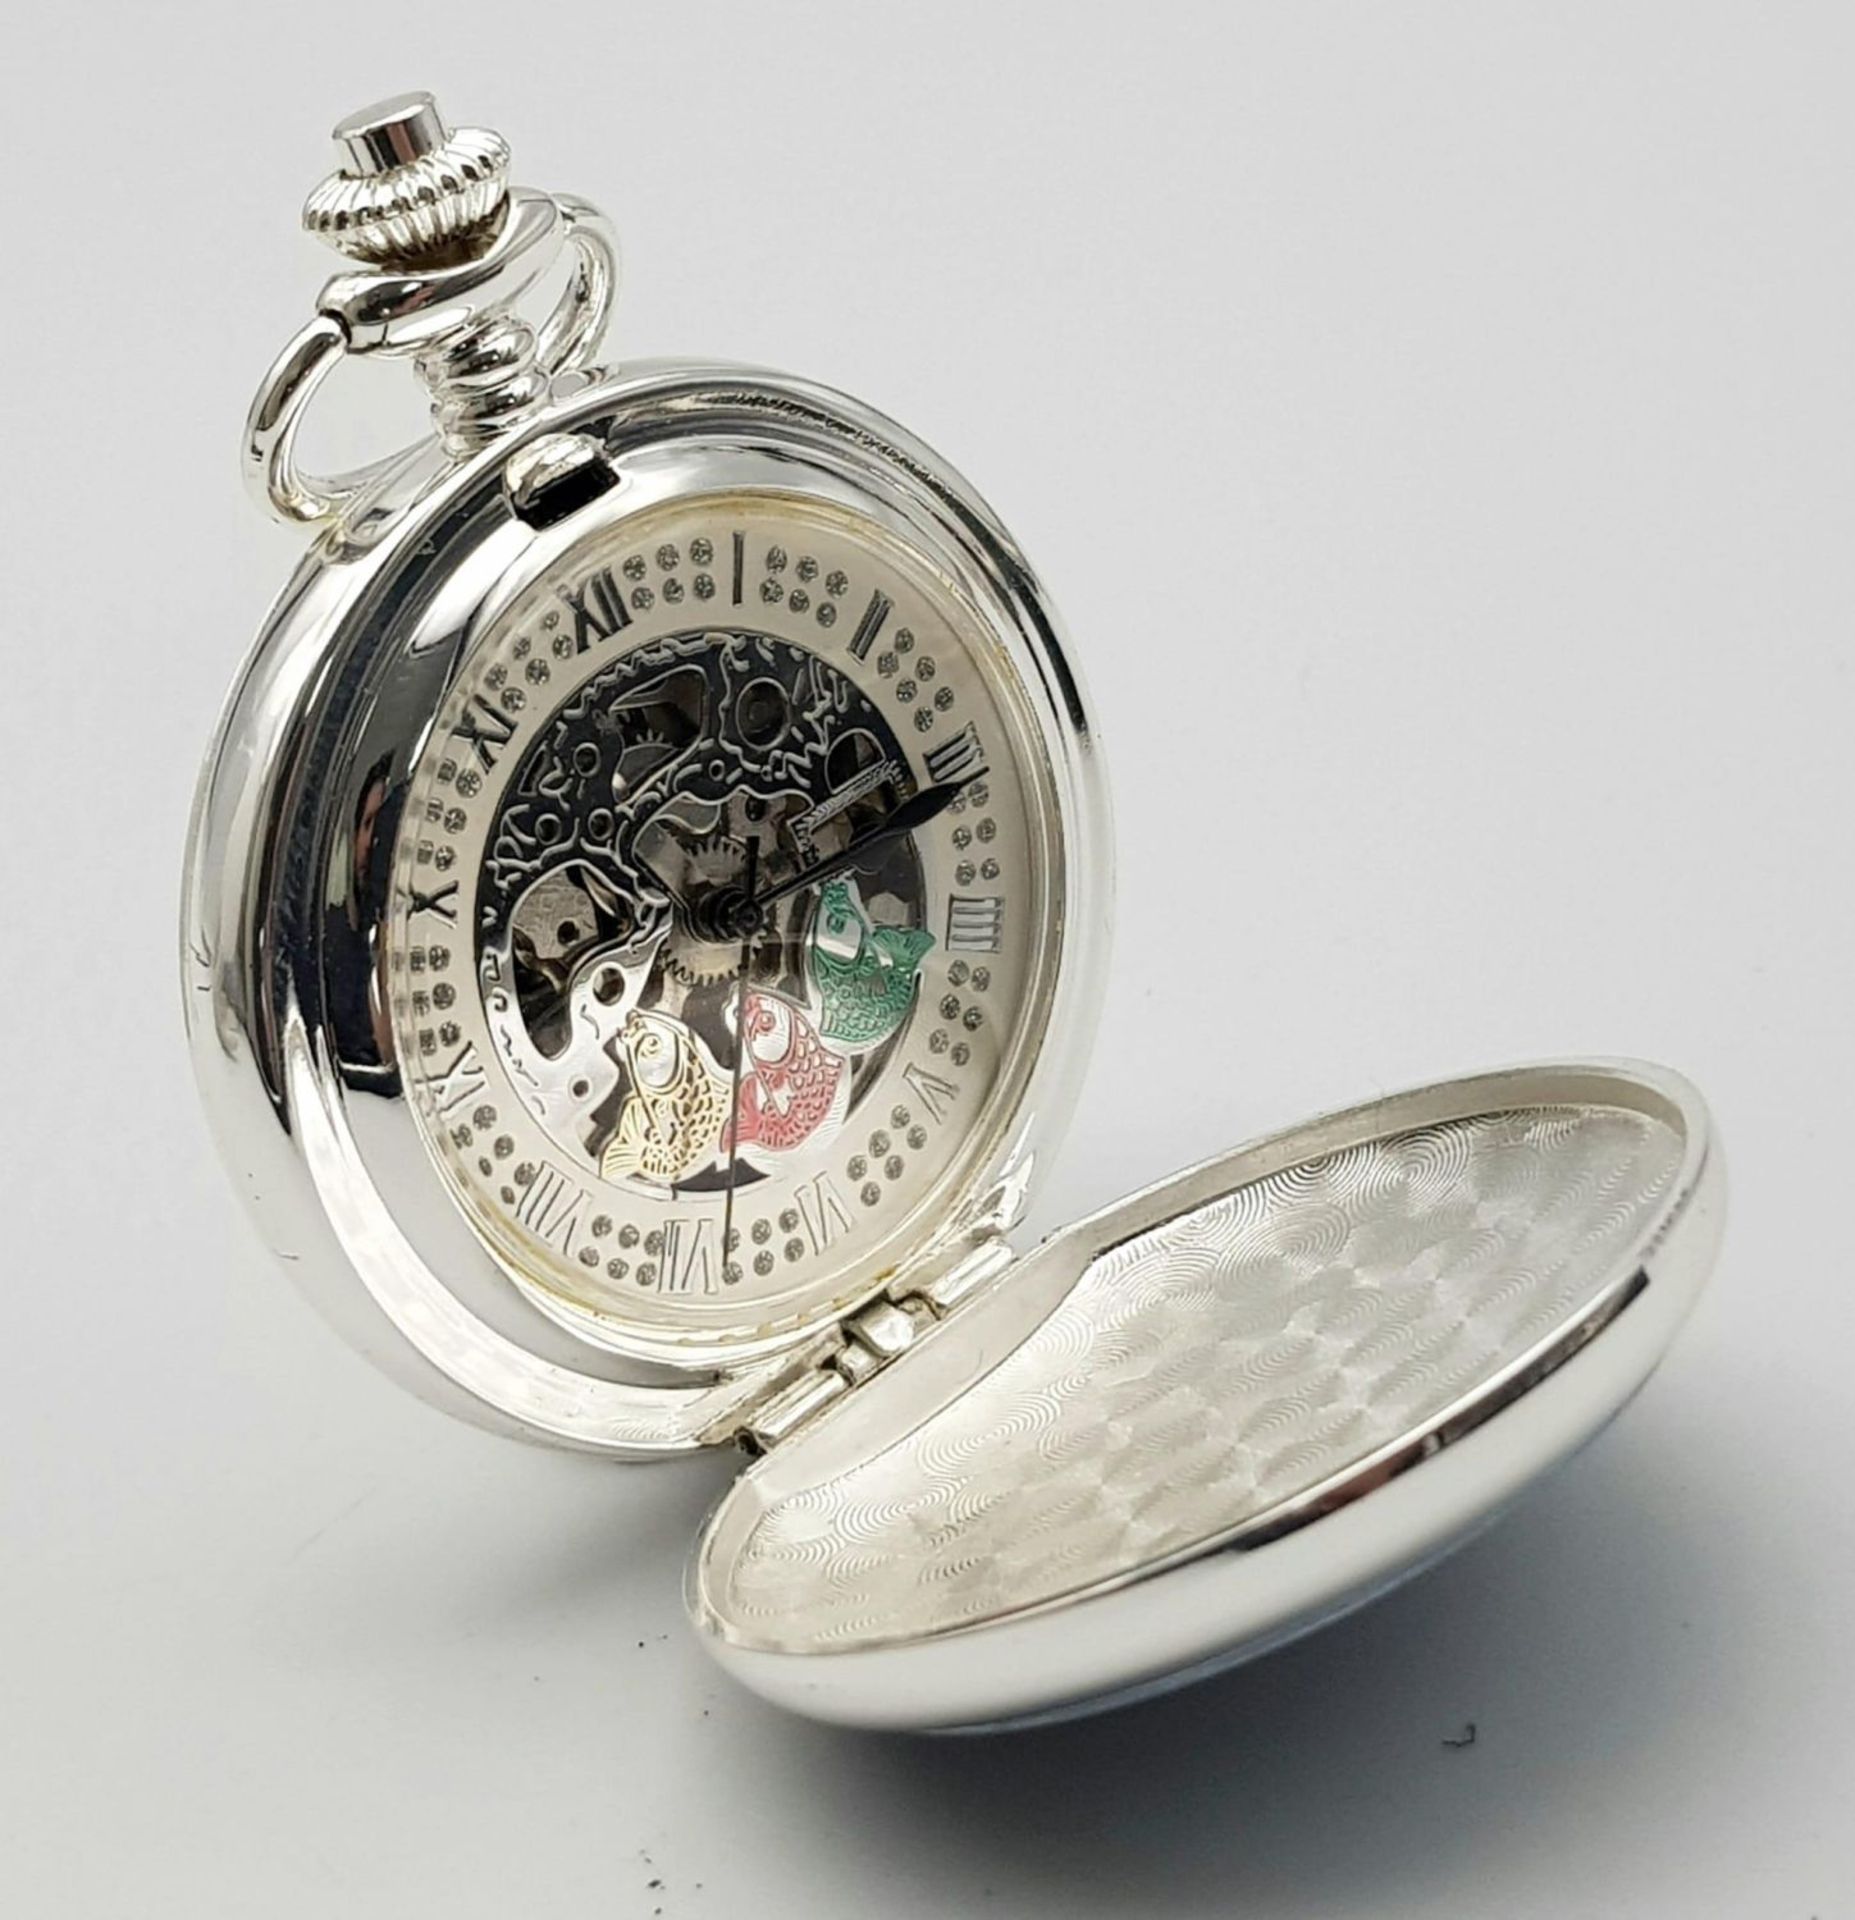 A Manual Wind Silver Plated Pocket Watch Detailing the Famous Steam Train ‘City of Truro’. The First - Bild 3 aus 10